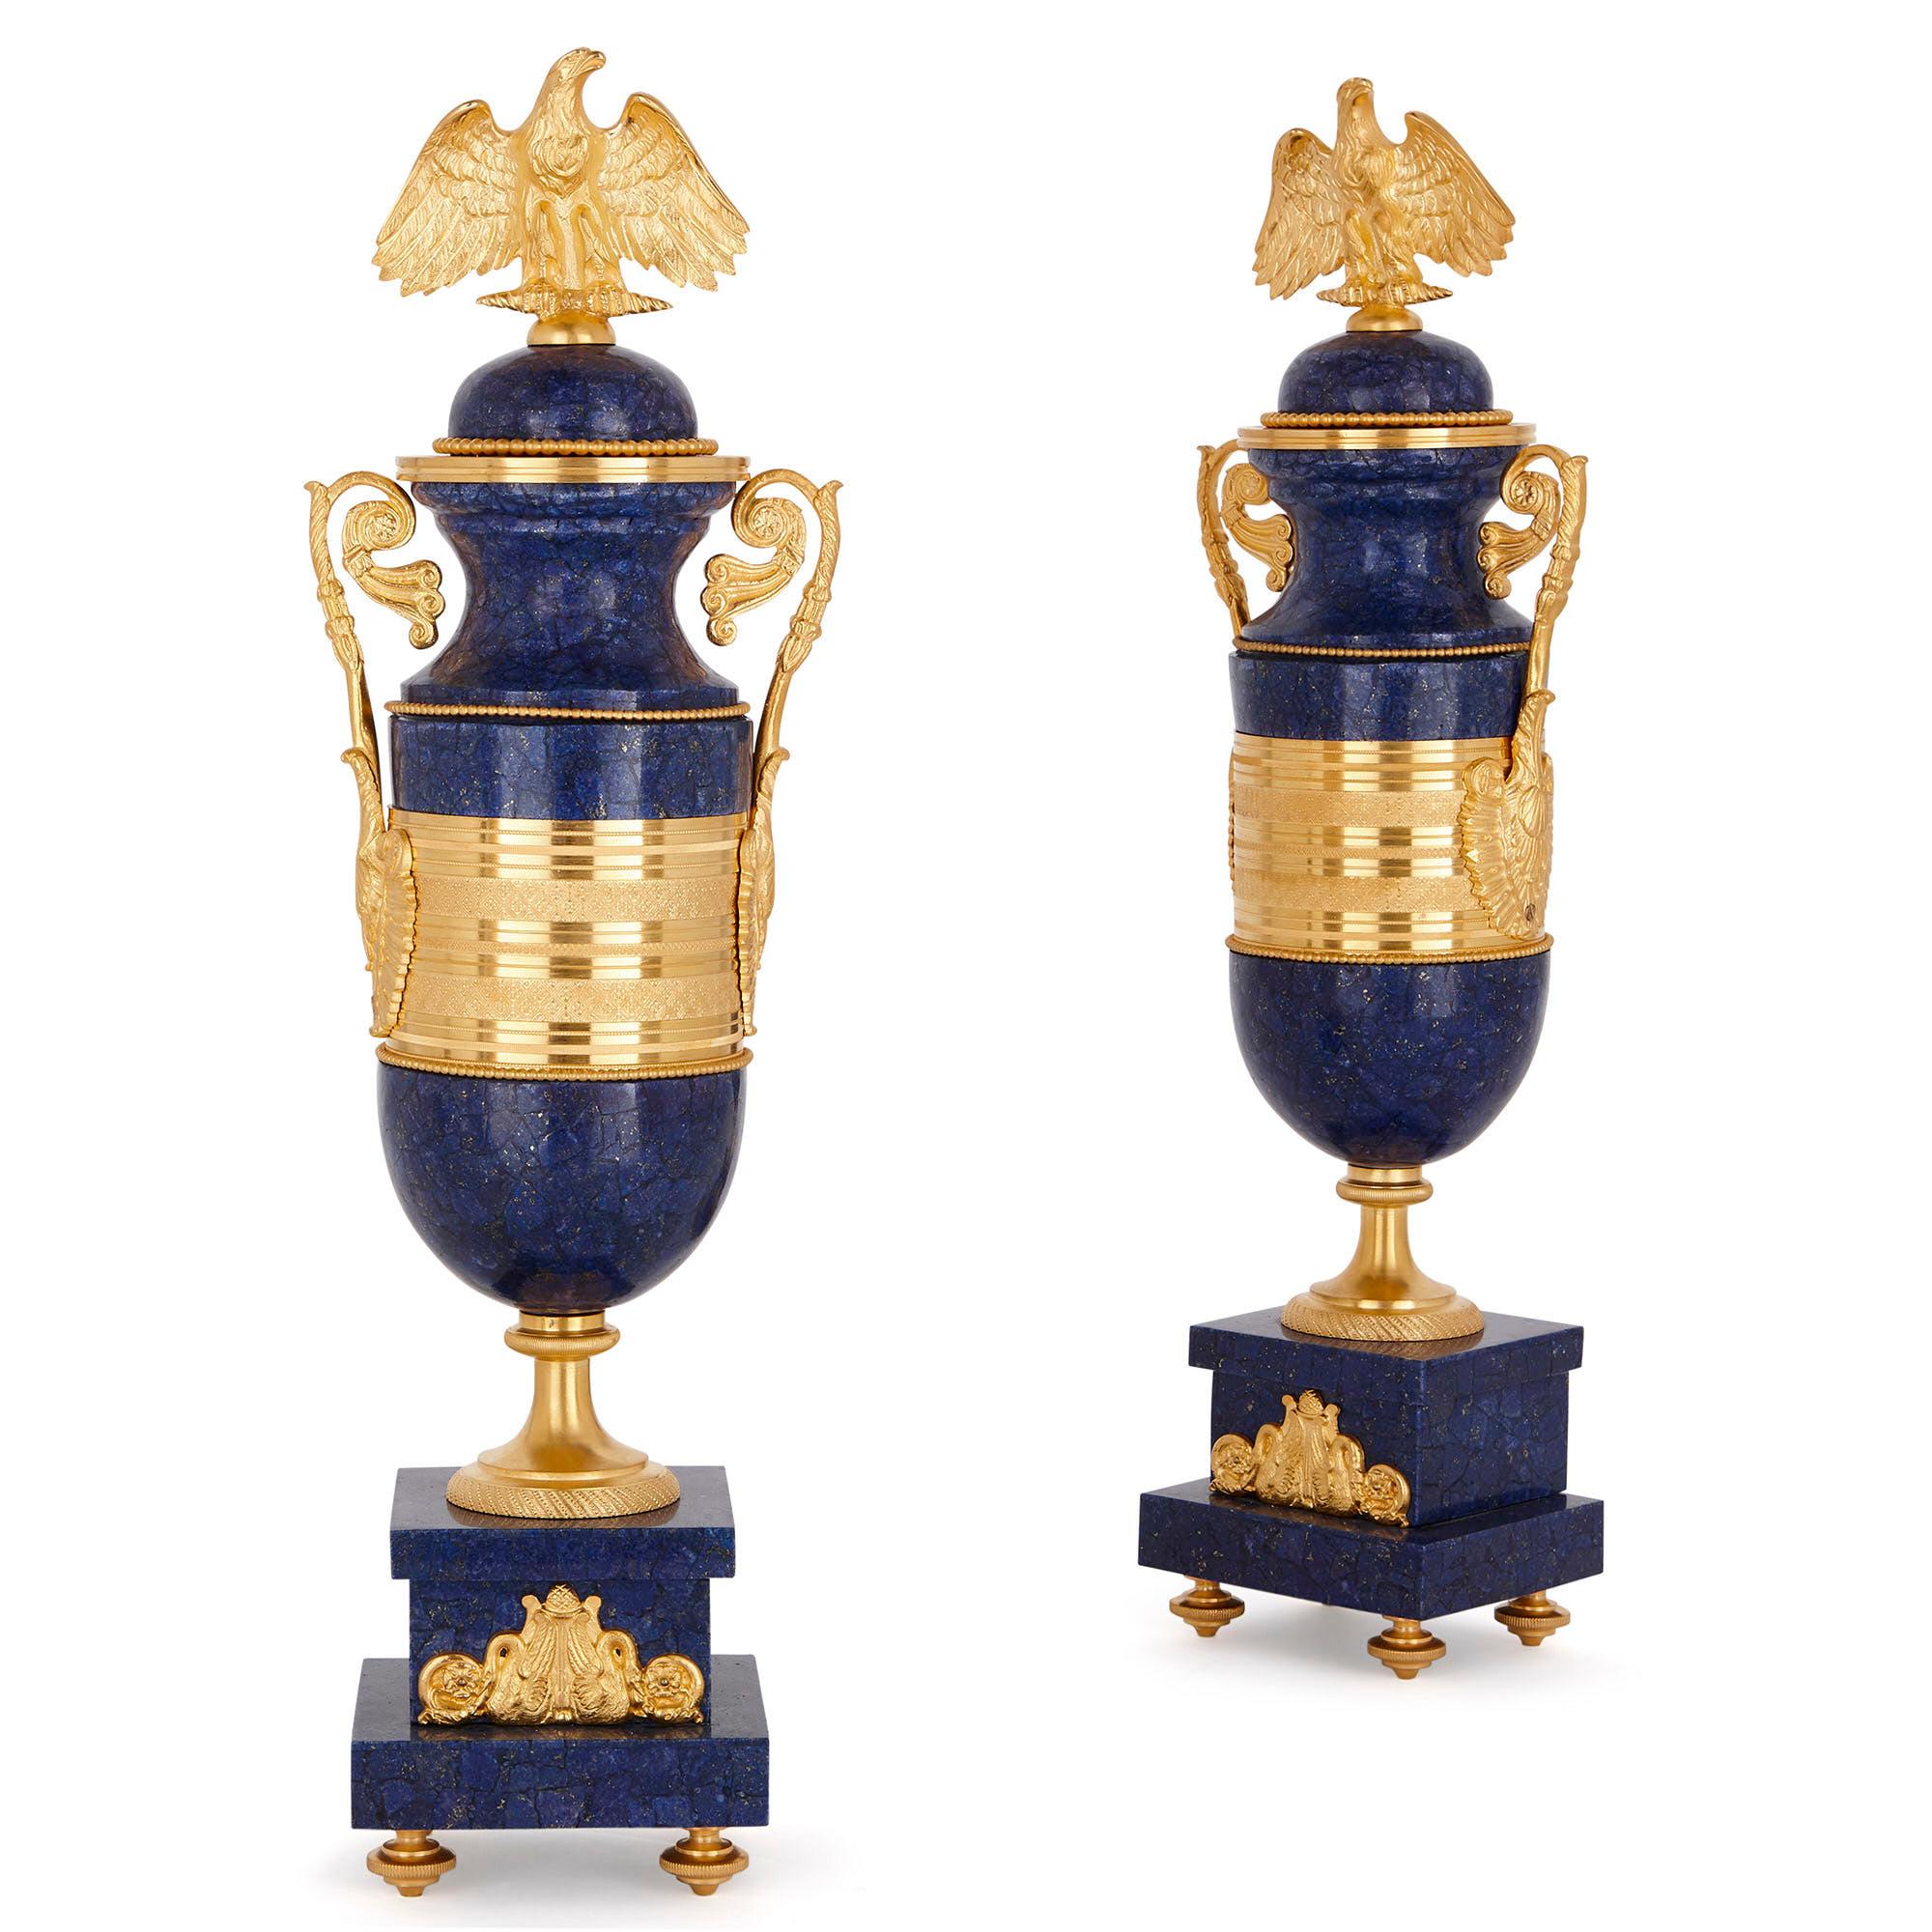 20th Century French Empire Style Lapis and Gilt Bronze Three-Piece Clock Set For Sale